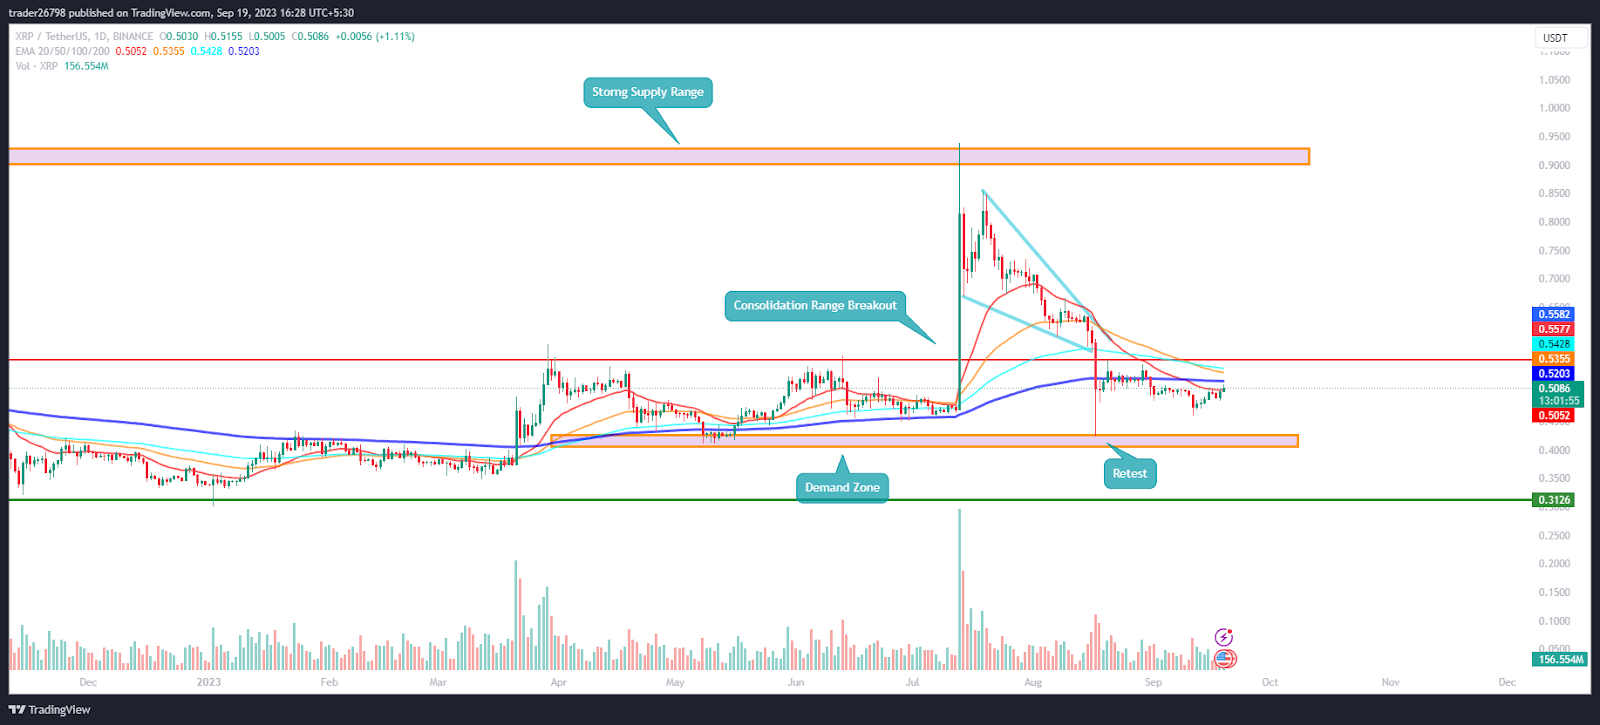 XRP Price Prediction: Will XRP Transcend the 200 Day EMA Barrier?